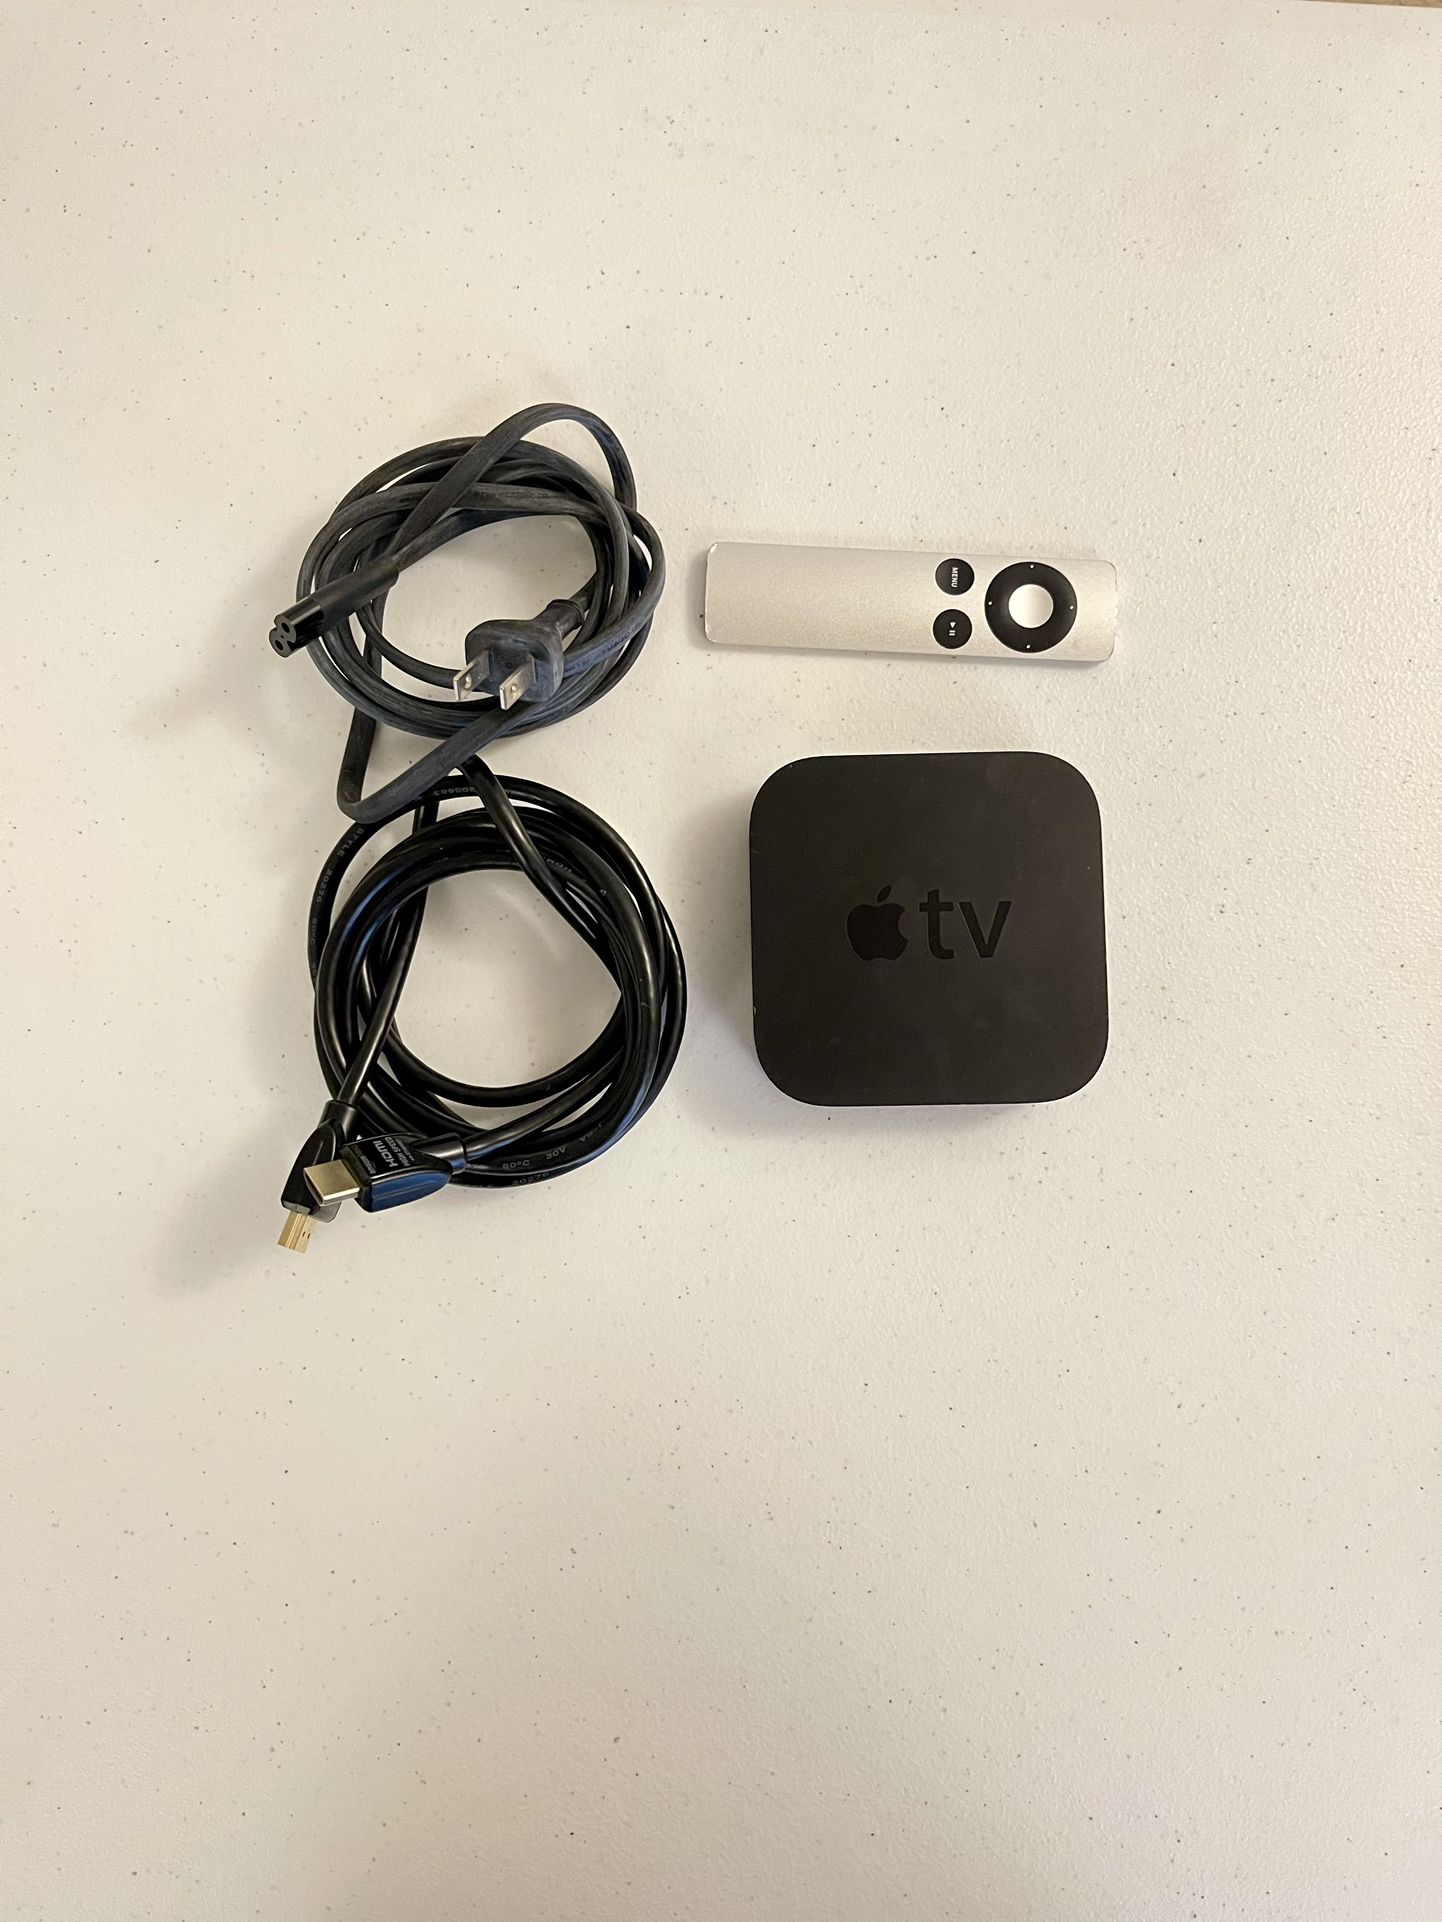 Apple TV 3rd Generation with Remote and HDMI Cable - Ship Only